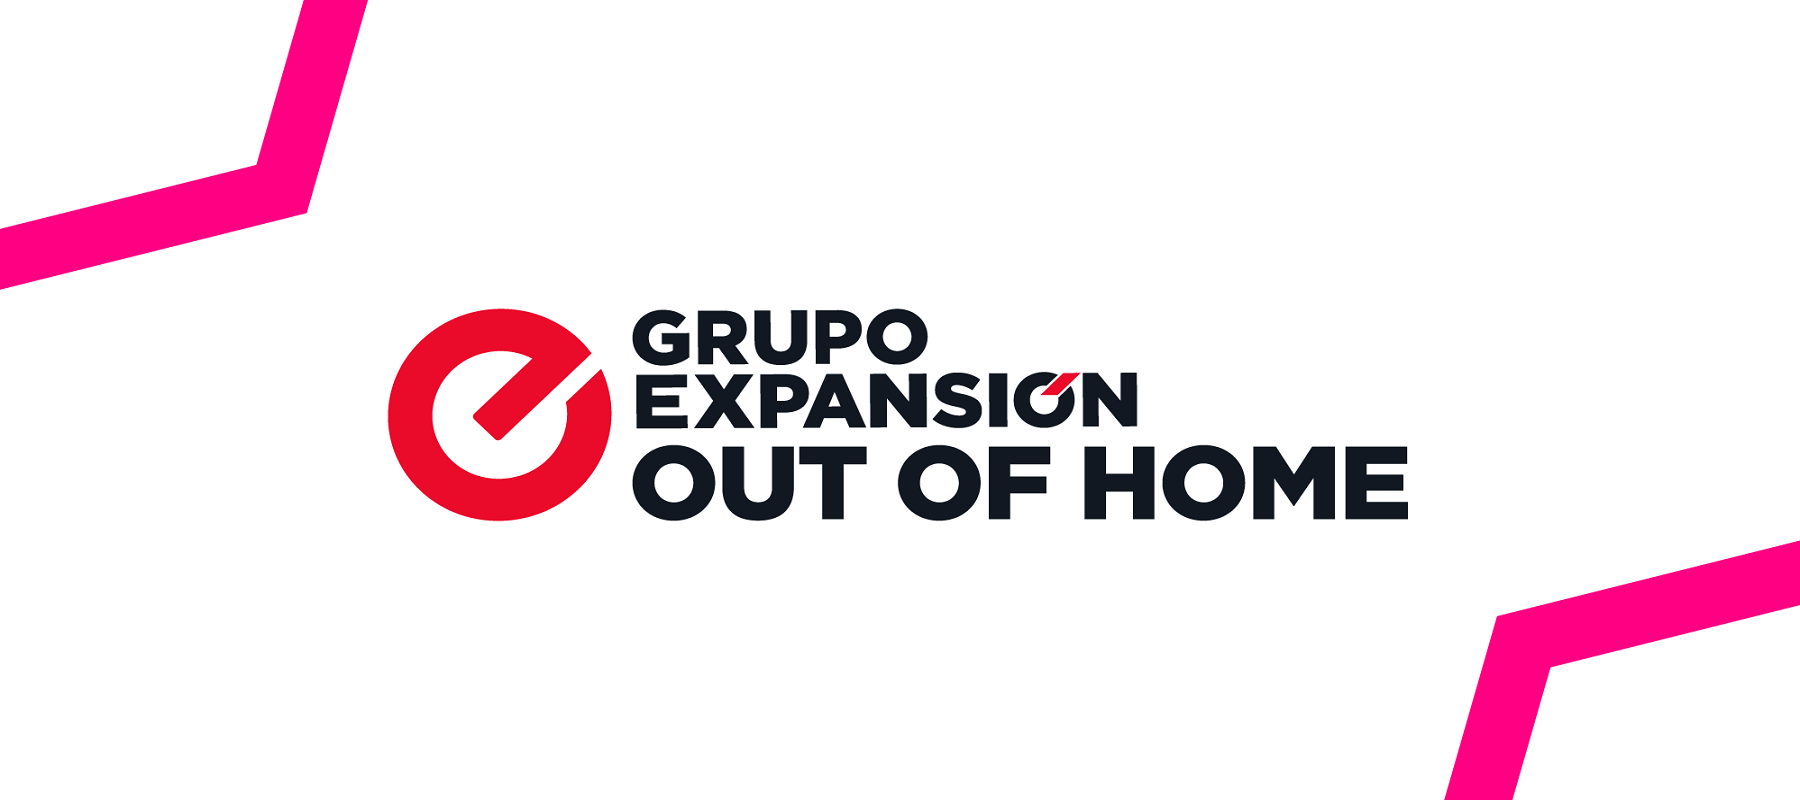 Hivestack partners with Grupo Expansión for programmatic DOOH in Mexico